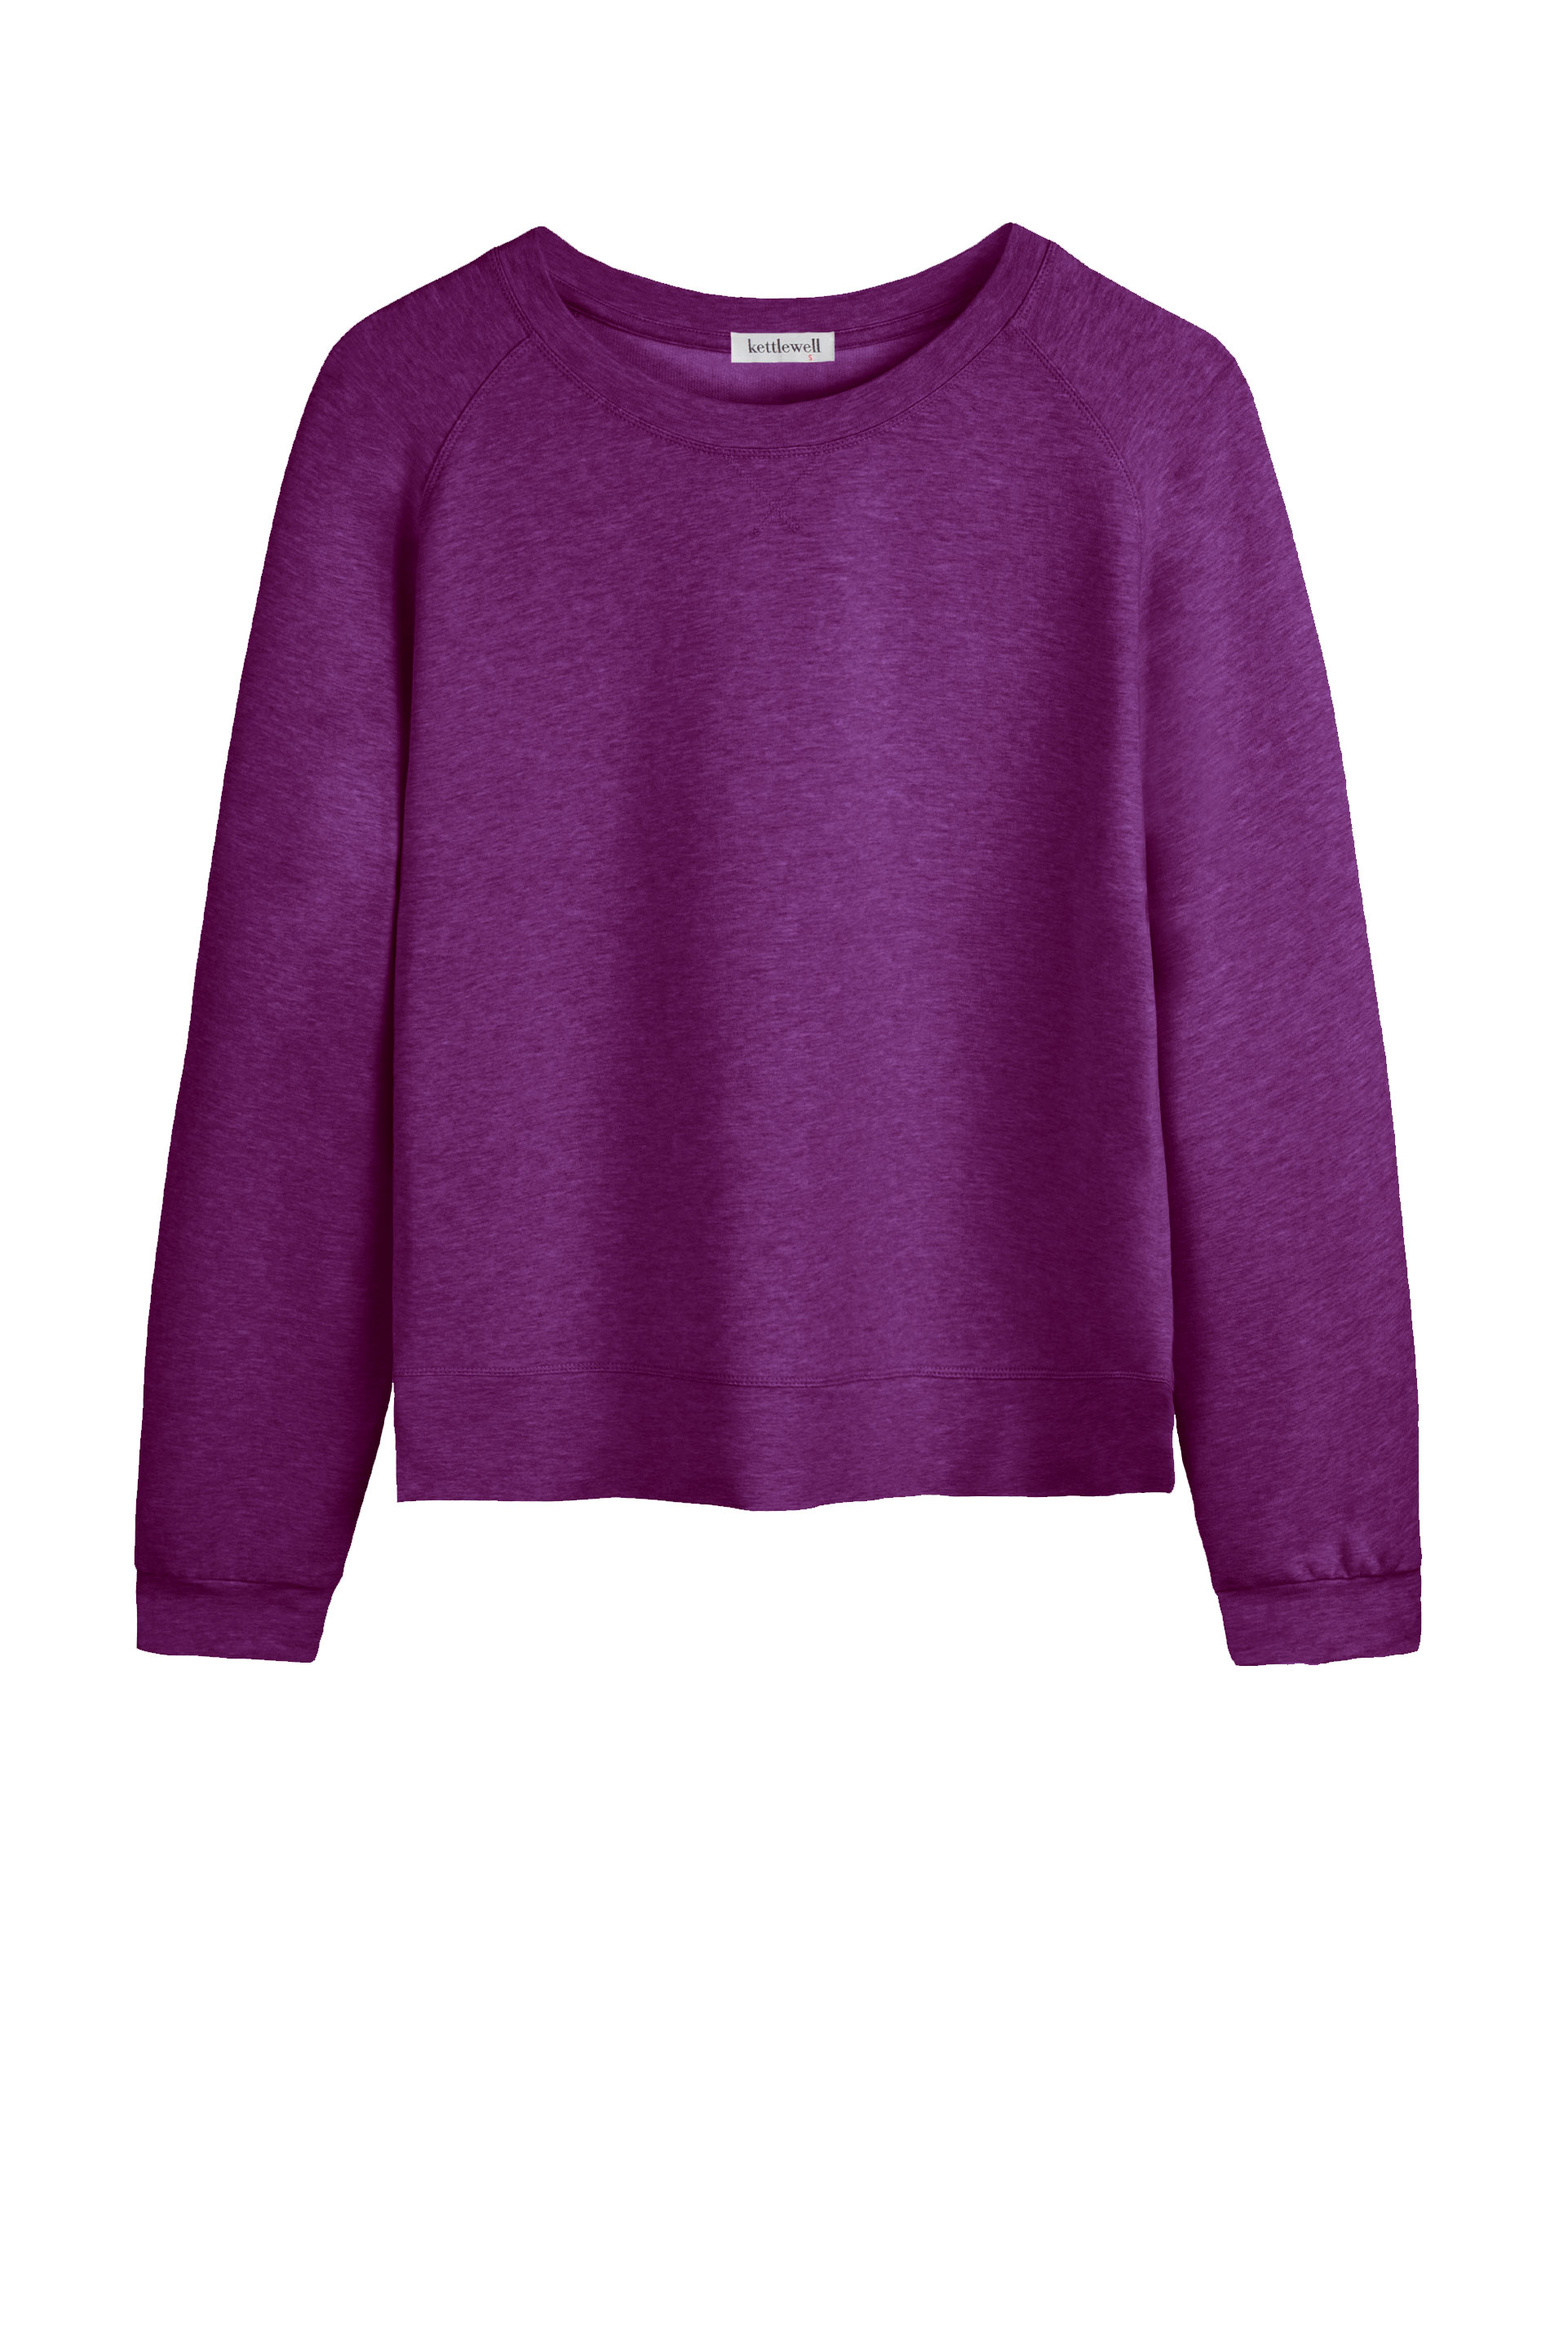 16003_supersoft_sweater_blackcurrant.jpg